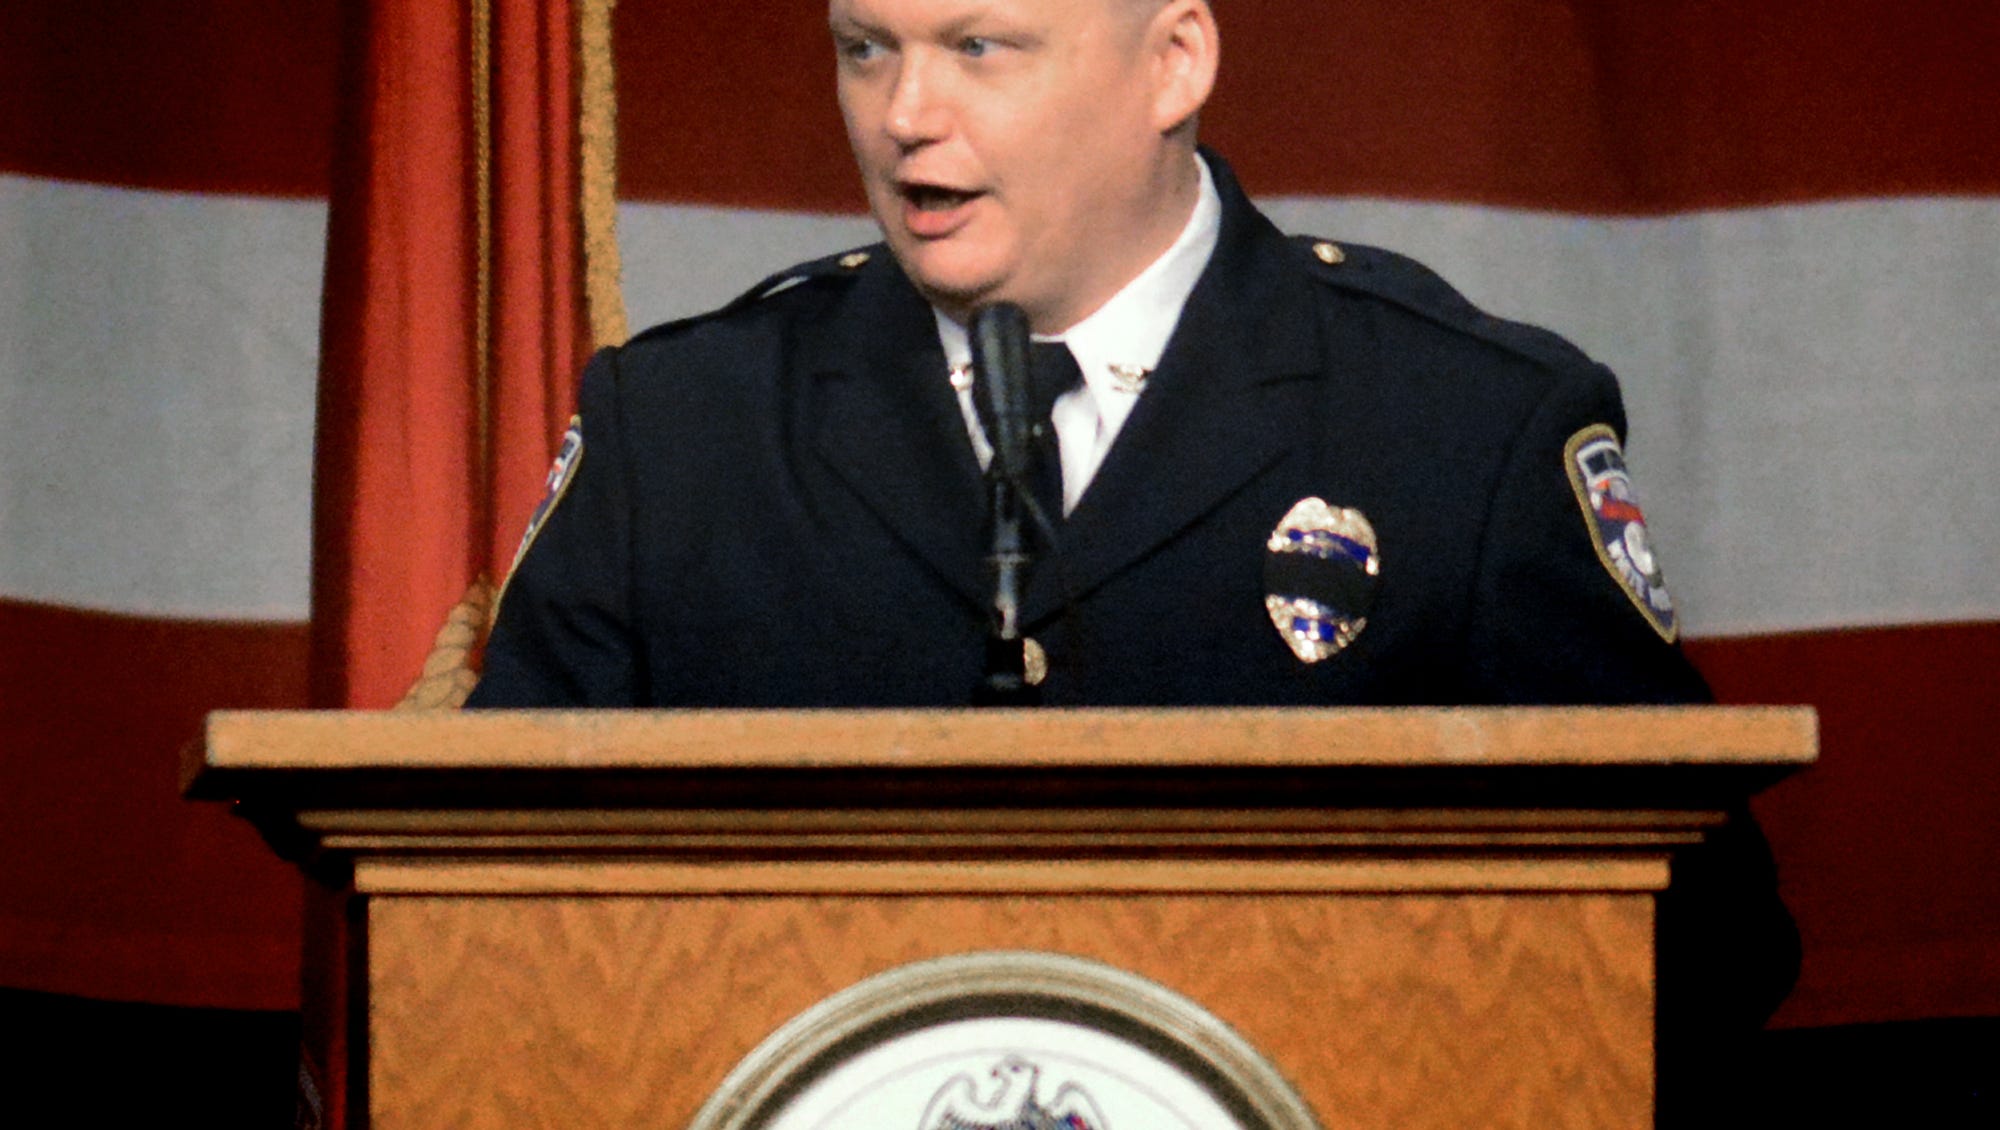 York City Police Chief Troy Bankert speaks during the memorial service for Alex Sable, a York City Police Officer and former Marine, at Utz Arena Friday, May 18, 2018. Sable was participating in a SWAT tactical training exercise Sunday, May 6, in Baltimore County, Maryland, when he suffered cardiac arrest. About 1,000 people, including law enforcement and fire personnel, attended the service. Bill Kalina photo